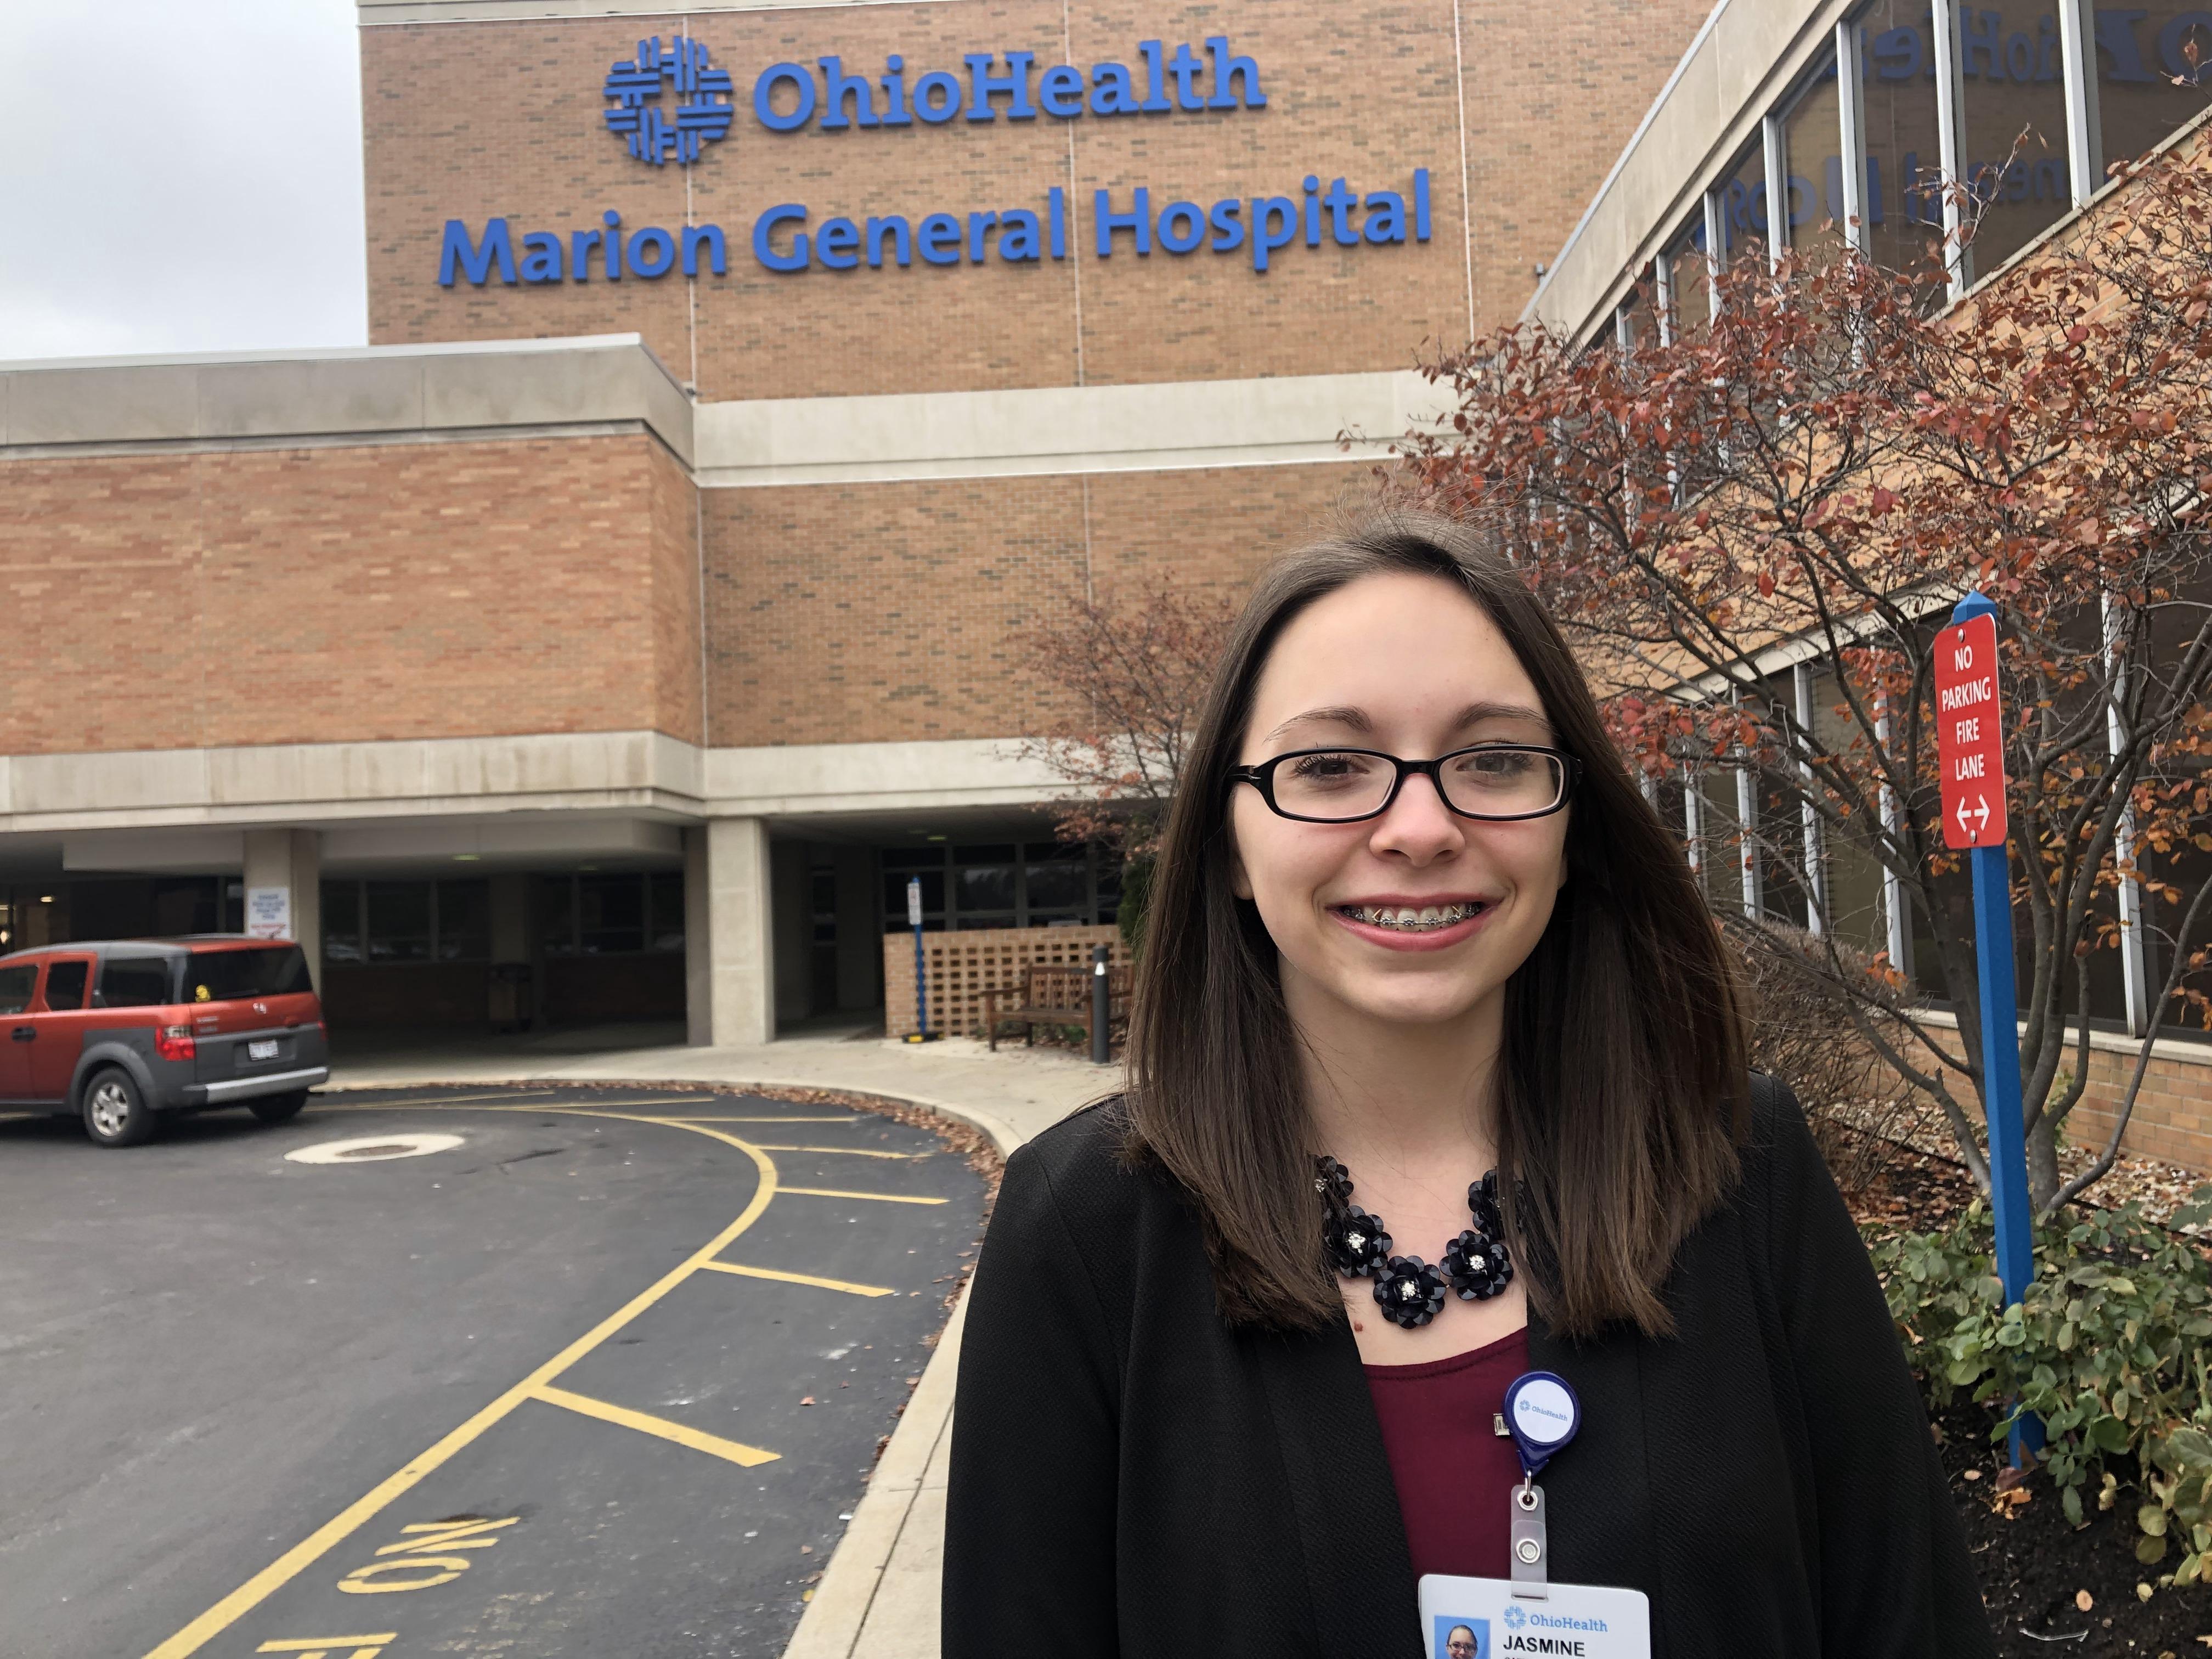 Marion native and Ohio State Marion student Jasmine Gaffney pictured in front of Ohio Health Marion General Hospital